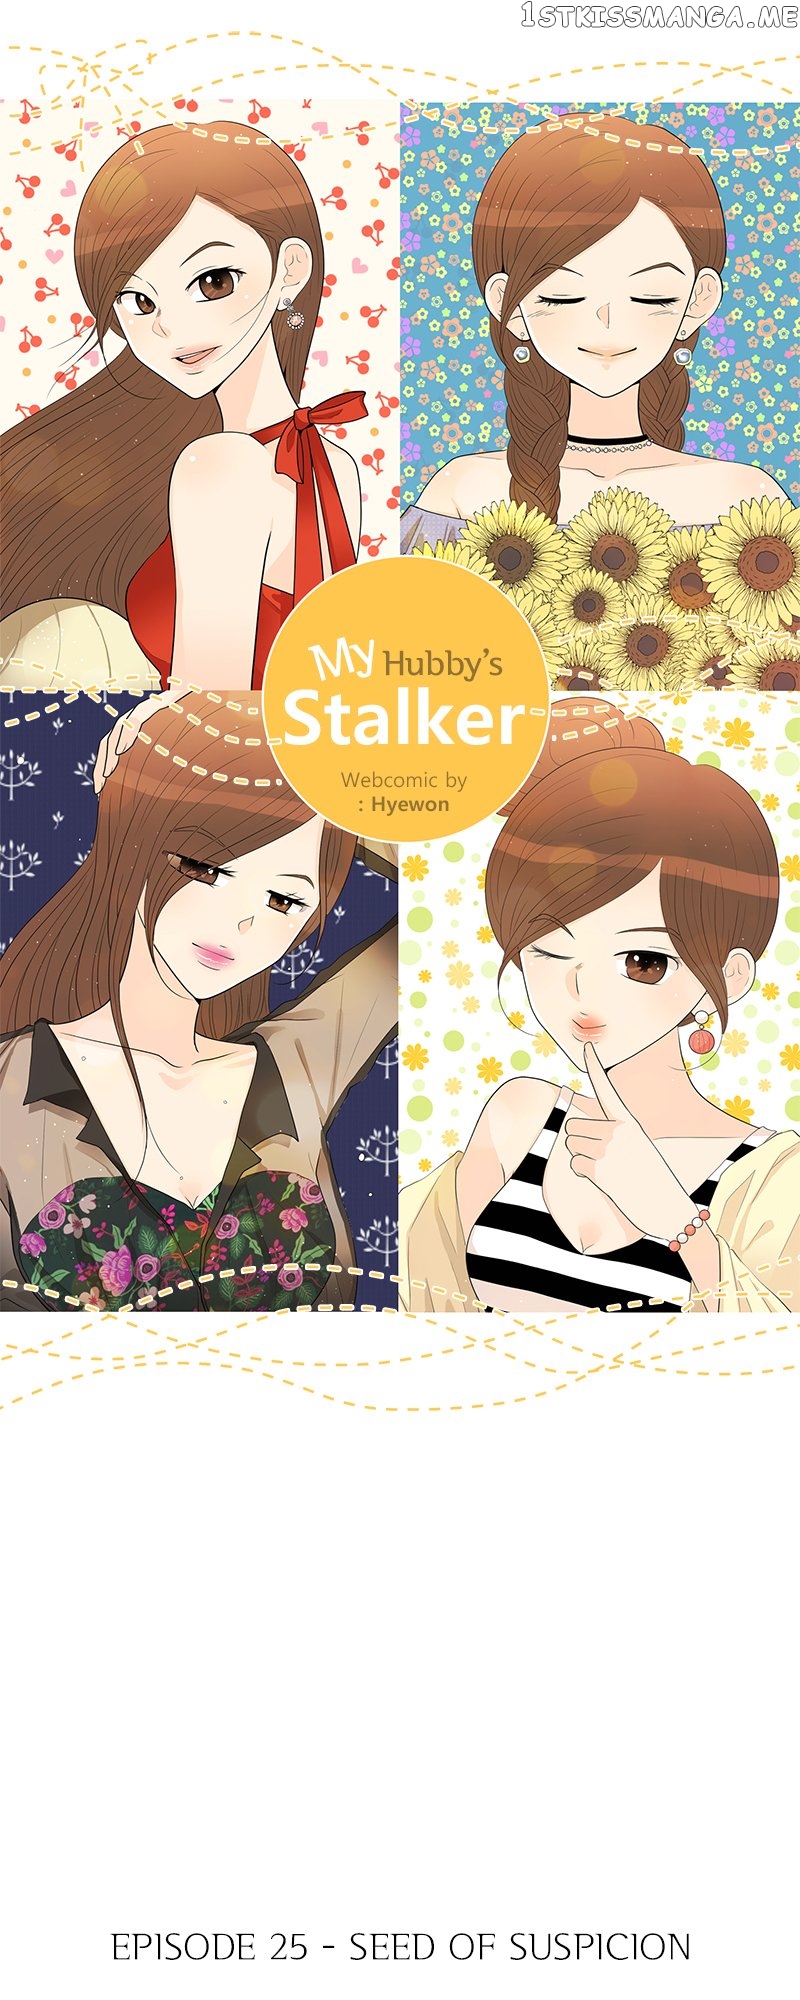 My Hubby’s Stalker chapter 25